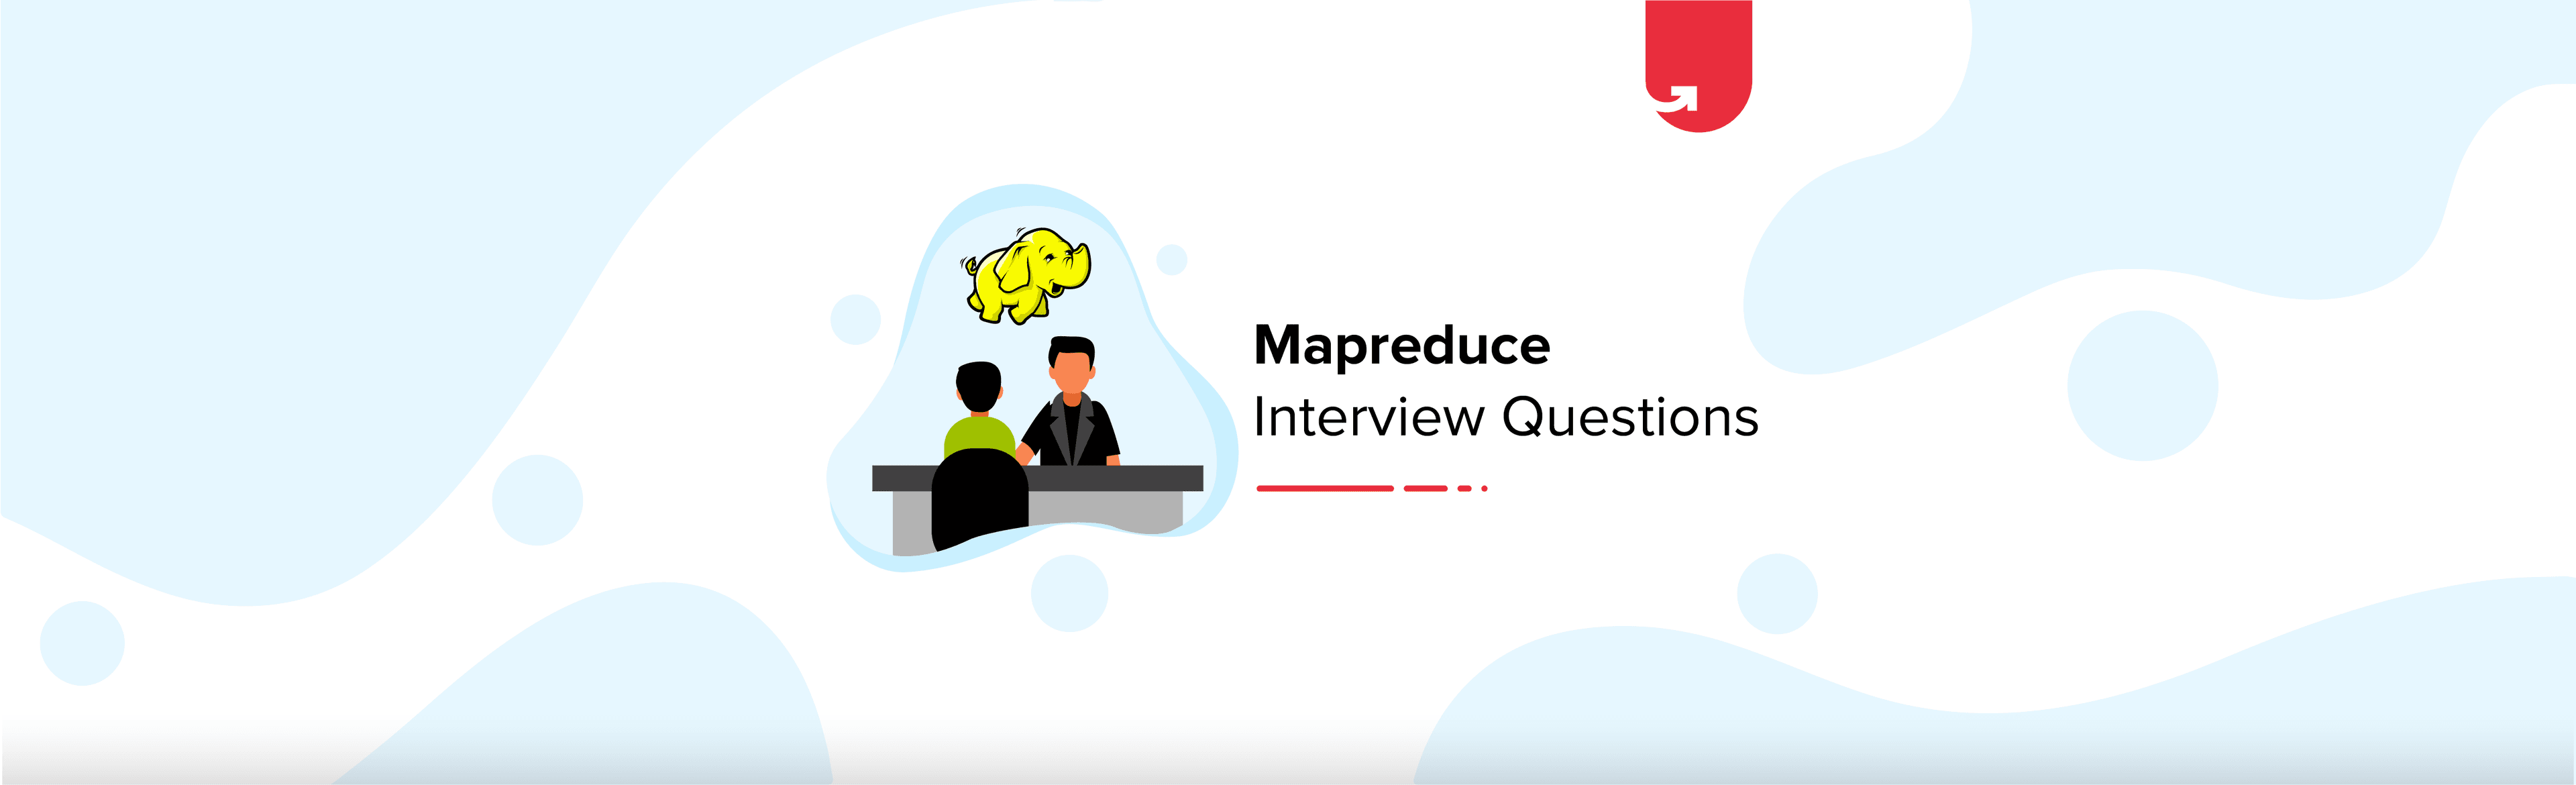 Top 15 MapReduce Interview Questions and Answers [For Beginners &#038; Experienced]